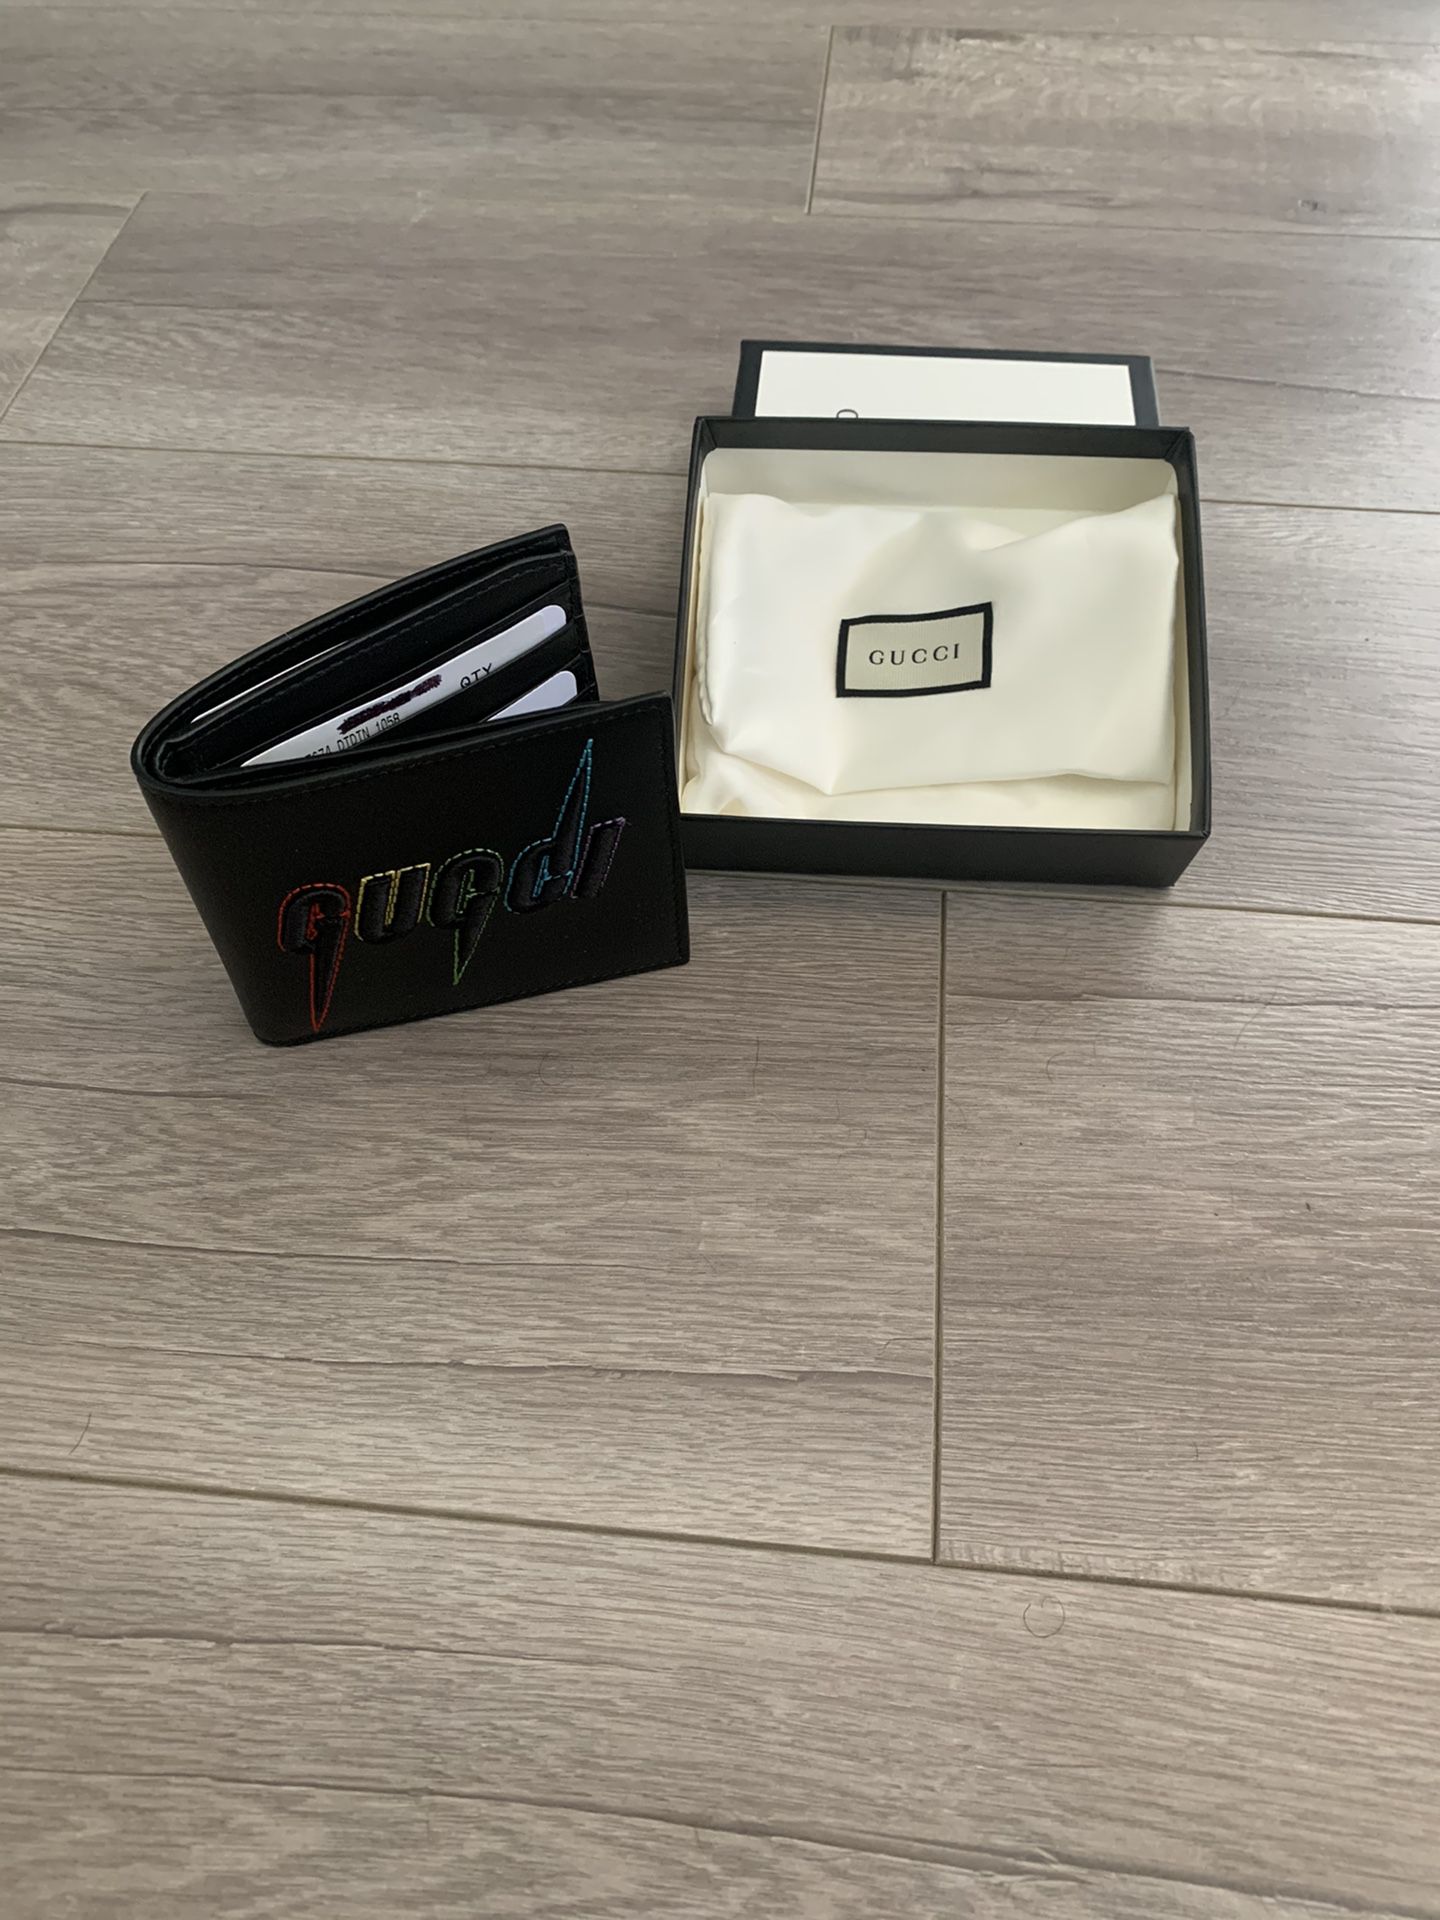 Gucci Wallet Black Colorful Rainbow Stitching